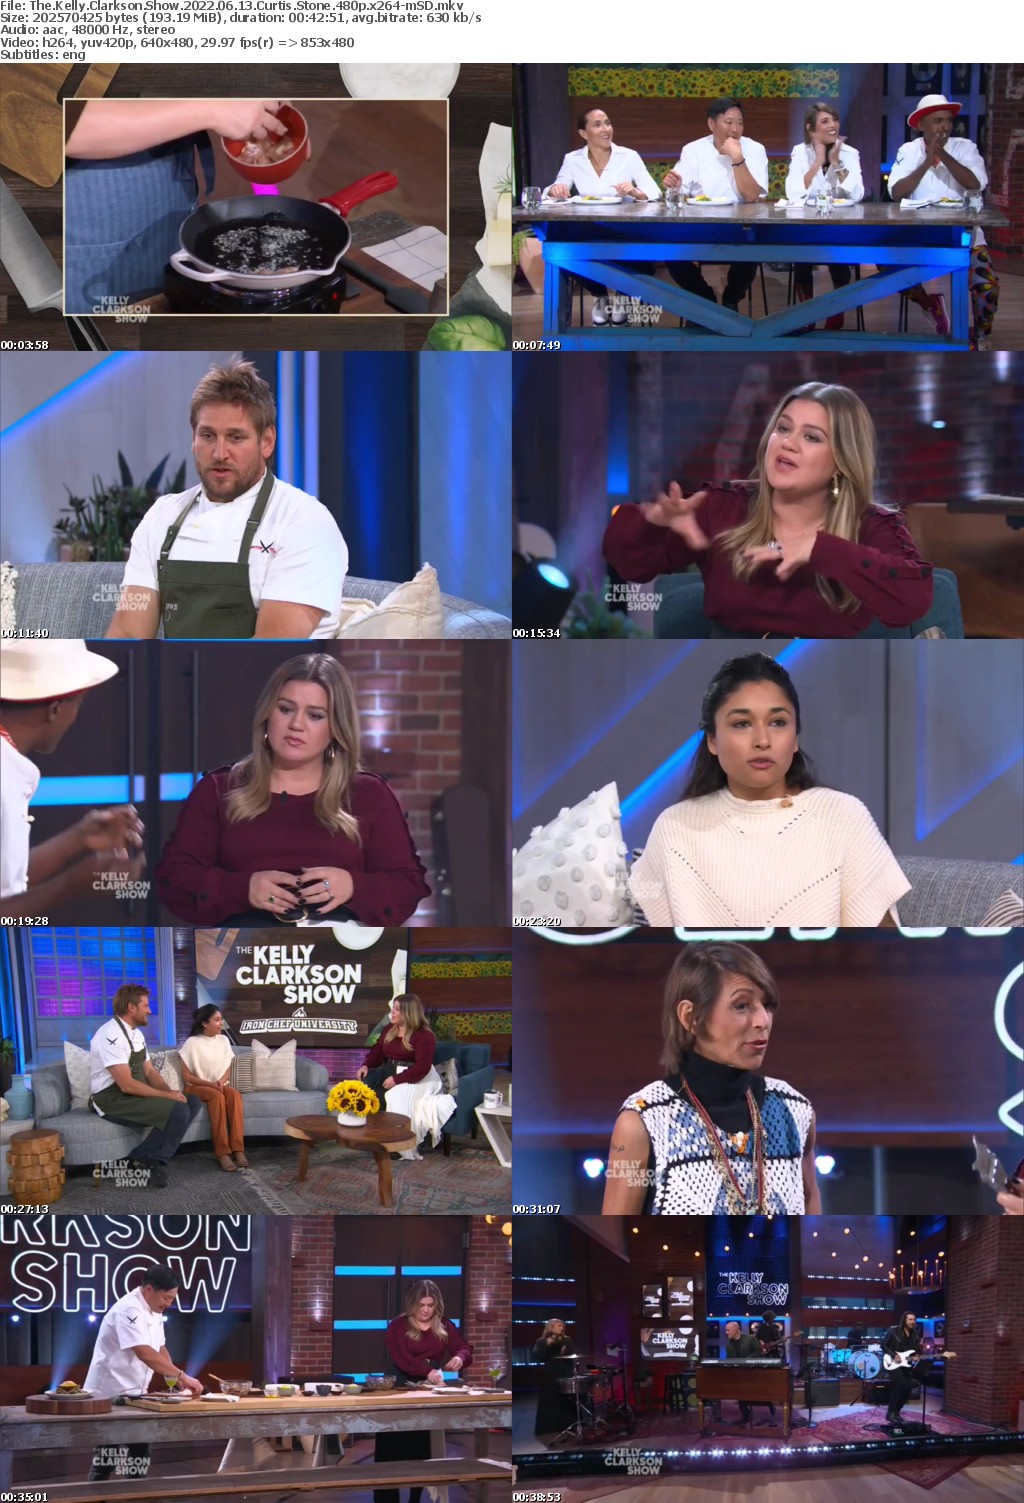 The Kelly Clarkson Show 2022 06 13 Curtis Stone 480p x264-mSD